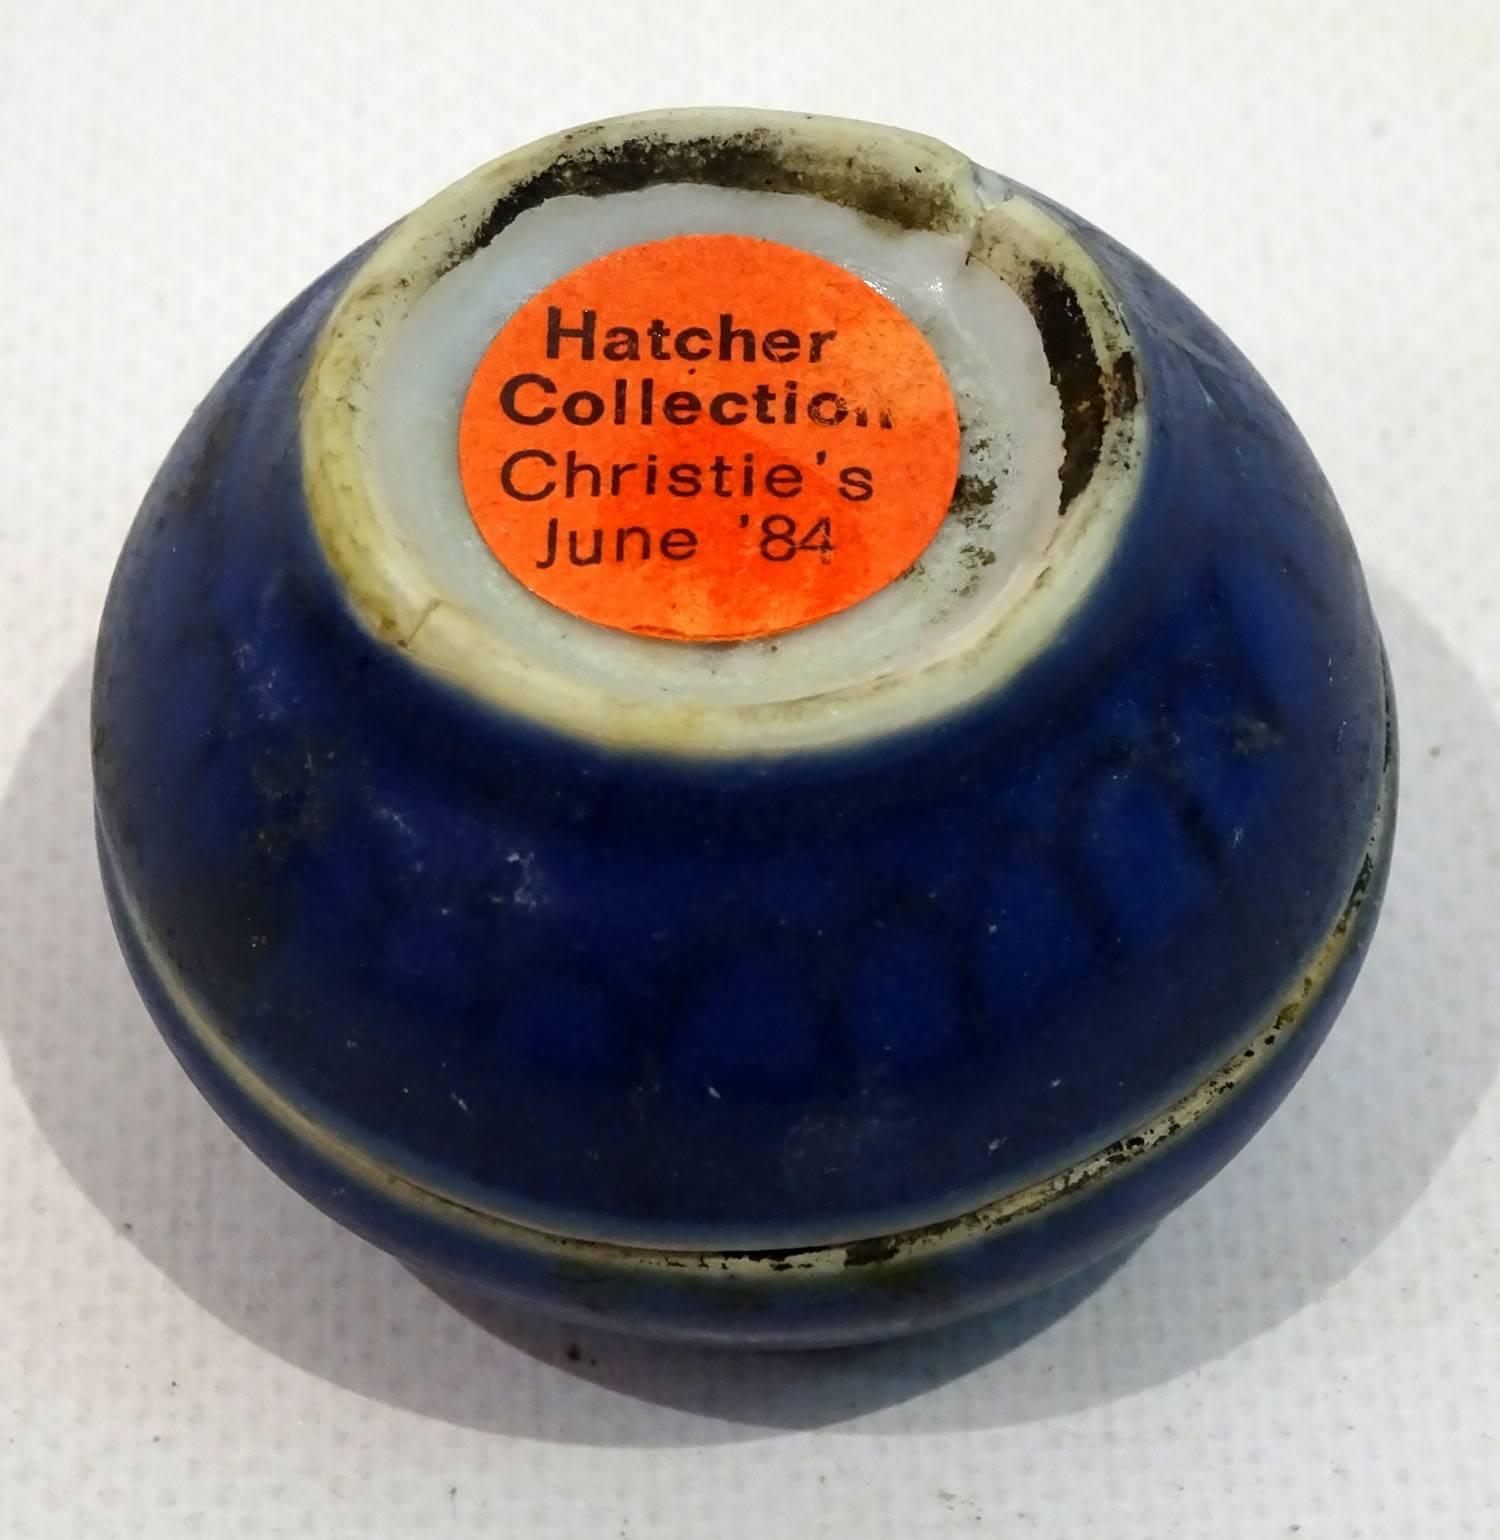 17th Century Chinese Porcelain Cosmetic Jar with Lid from The Hatcher Collection 6